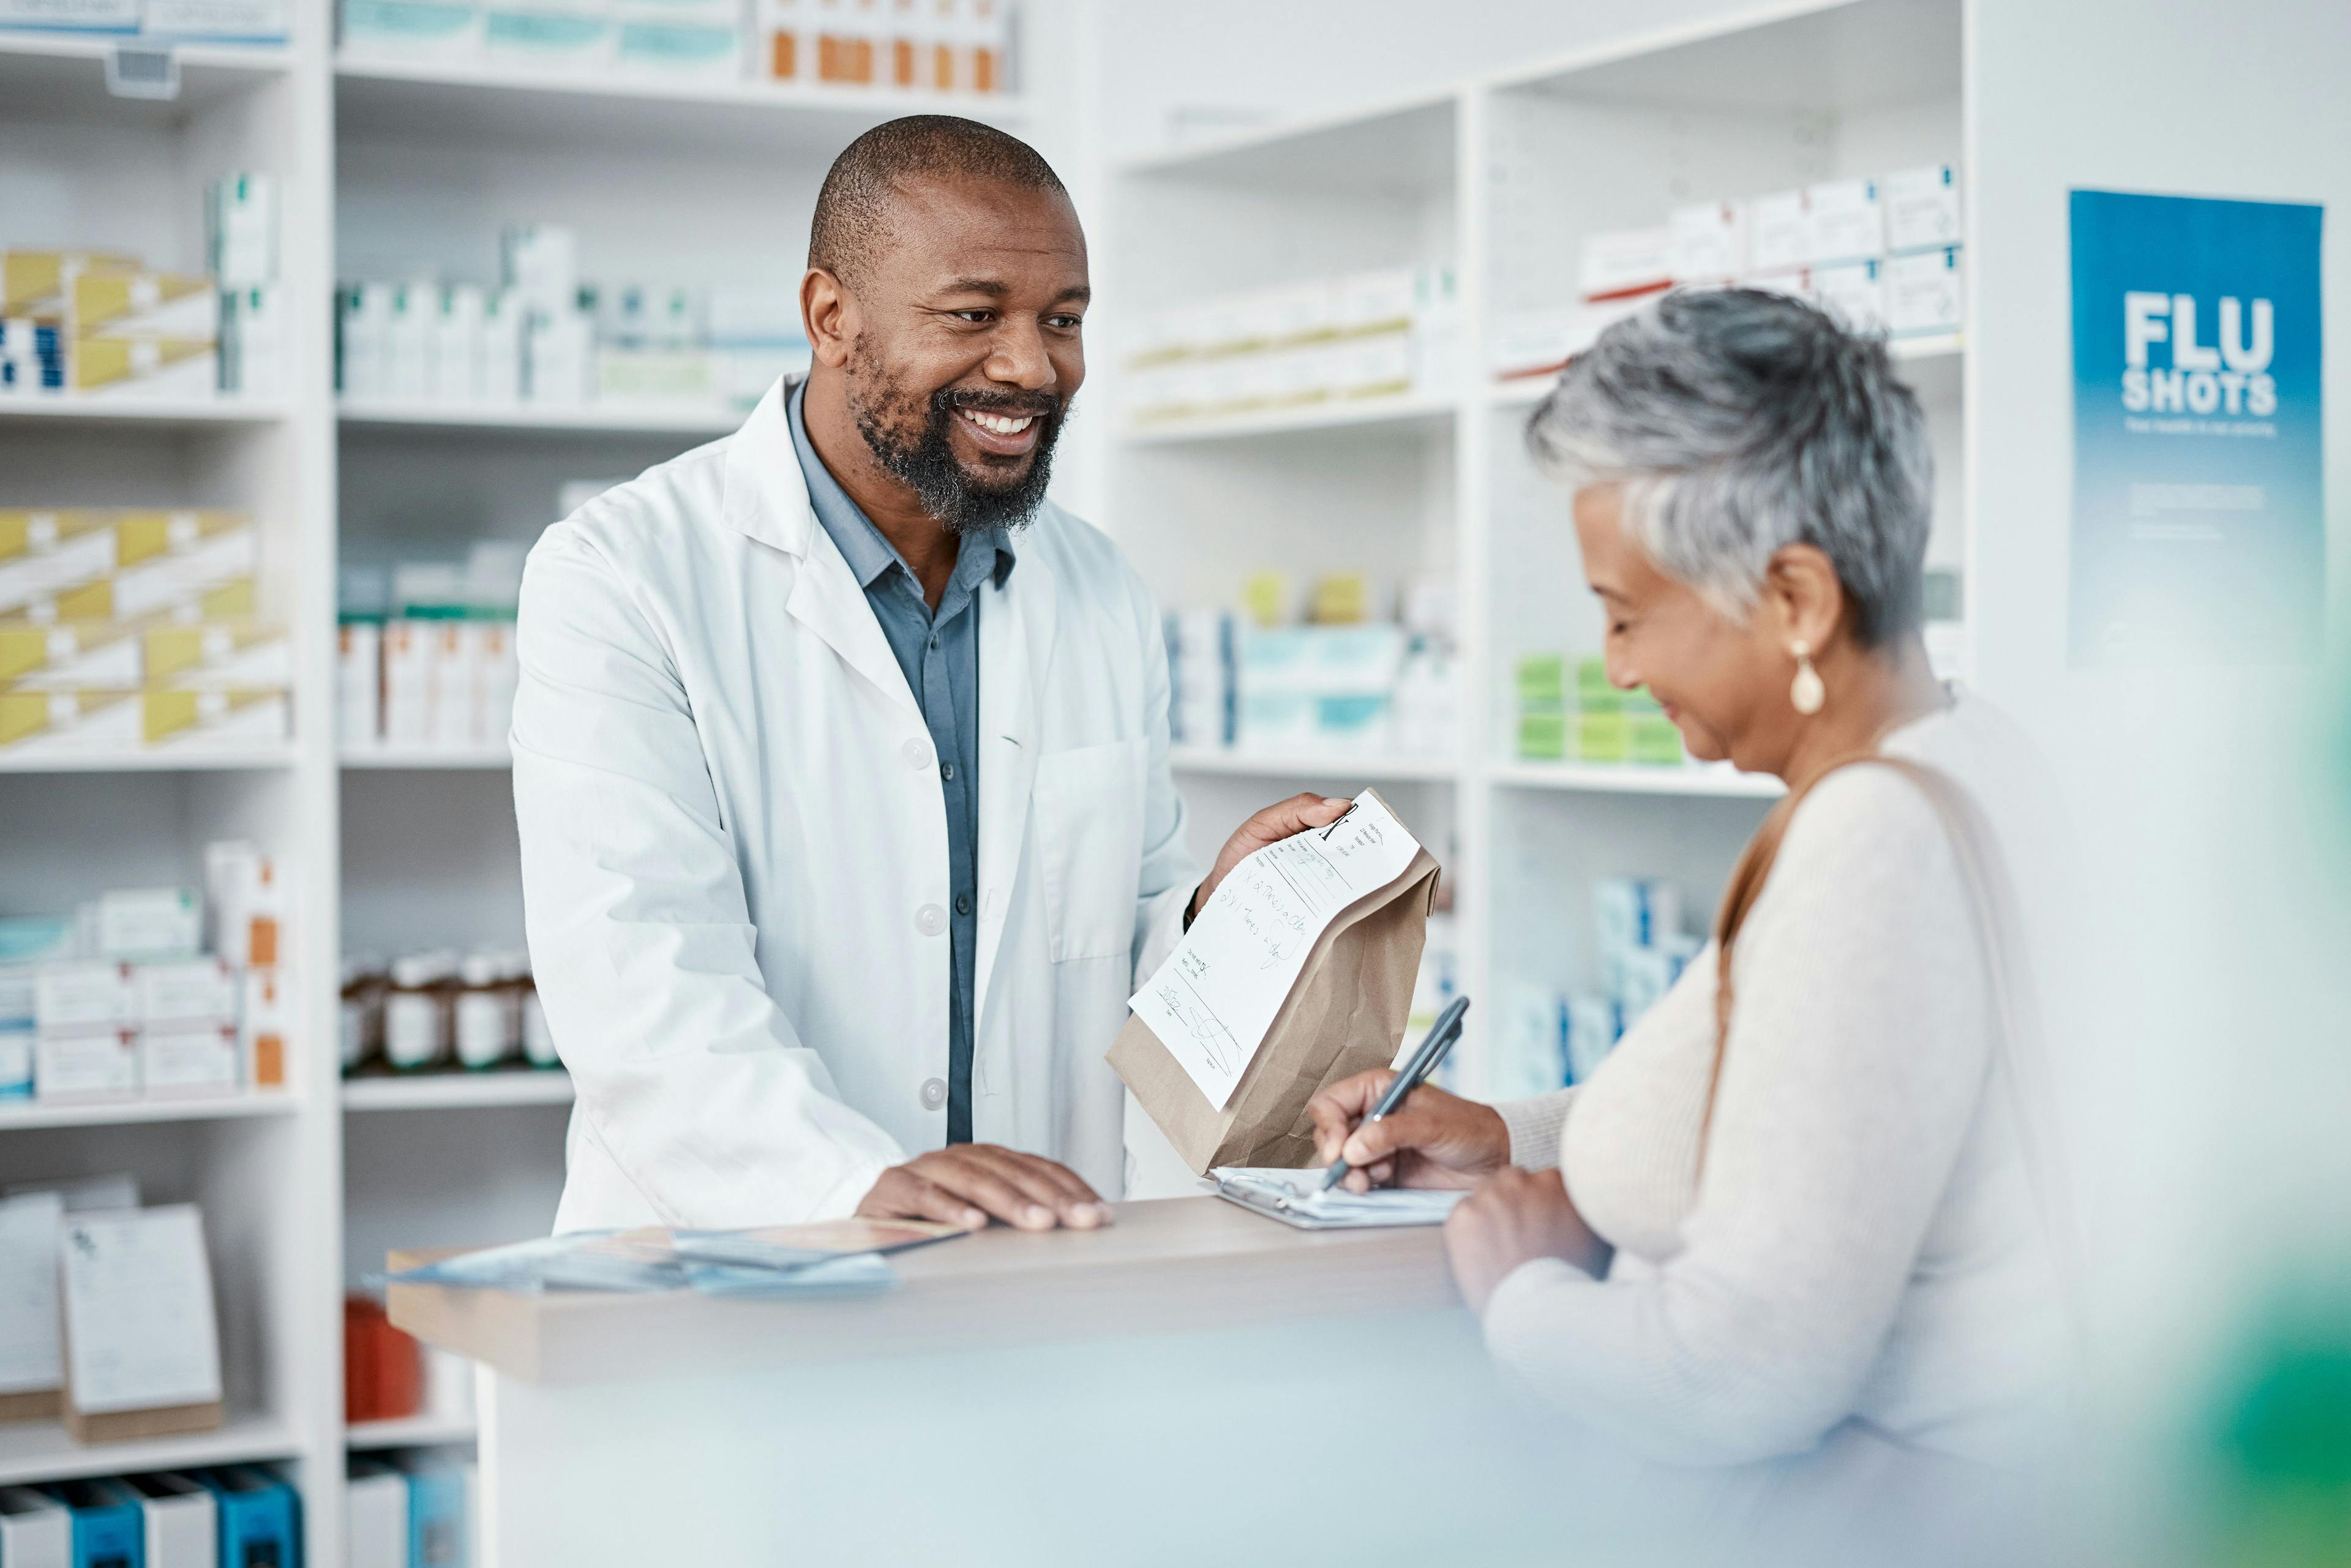 A pharmacist hands medication to a patient / Clayton D/peopleimages.com - stock.adobe.com